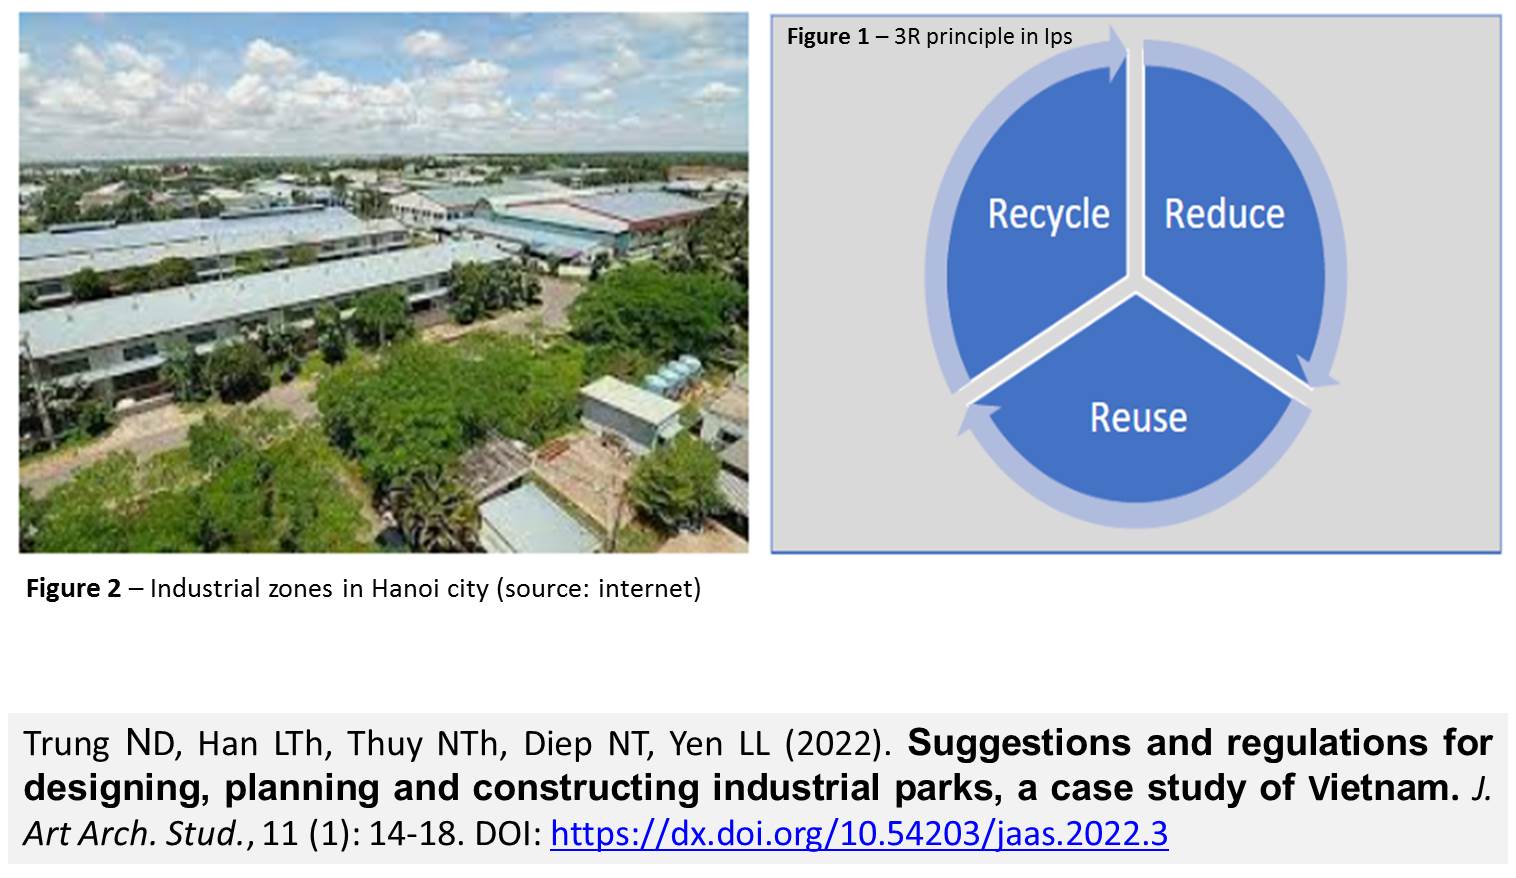 designing_planning_and_constructing_industrial_parks_in_Vietnam